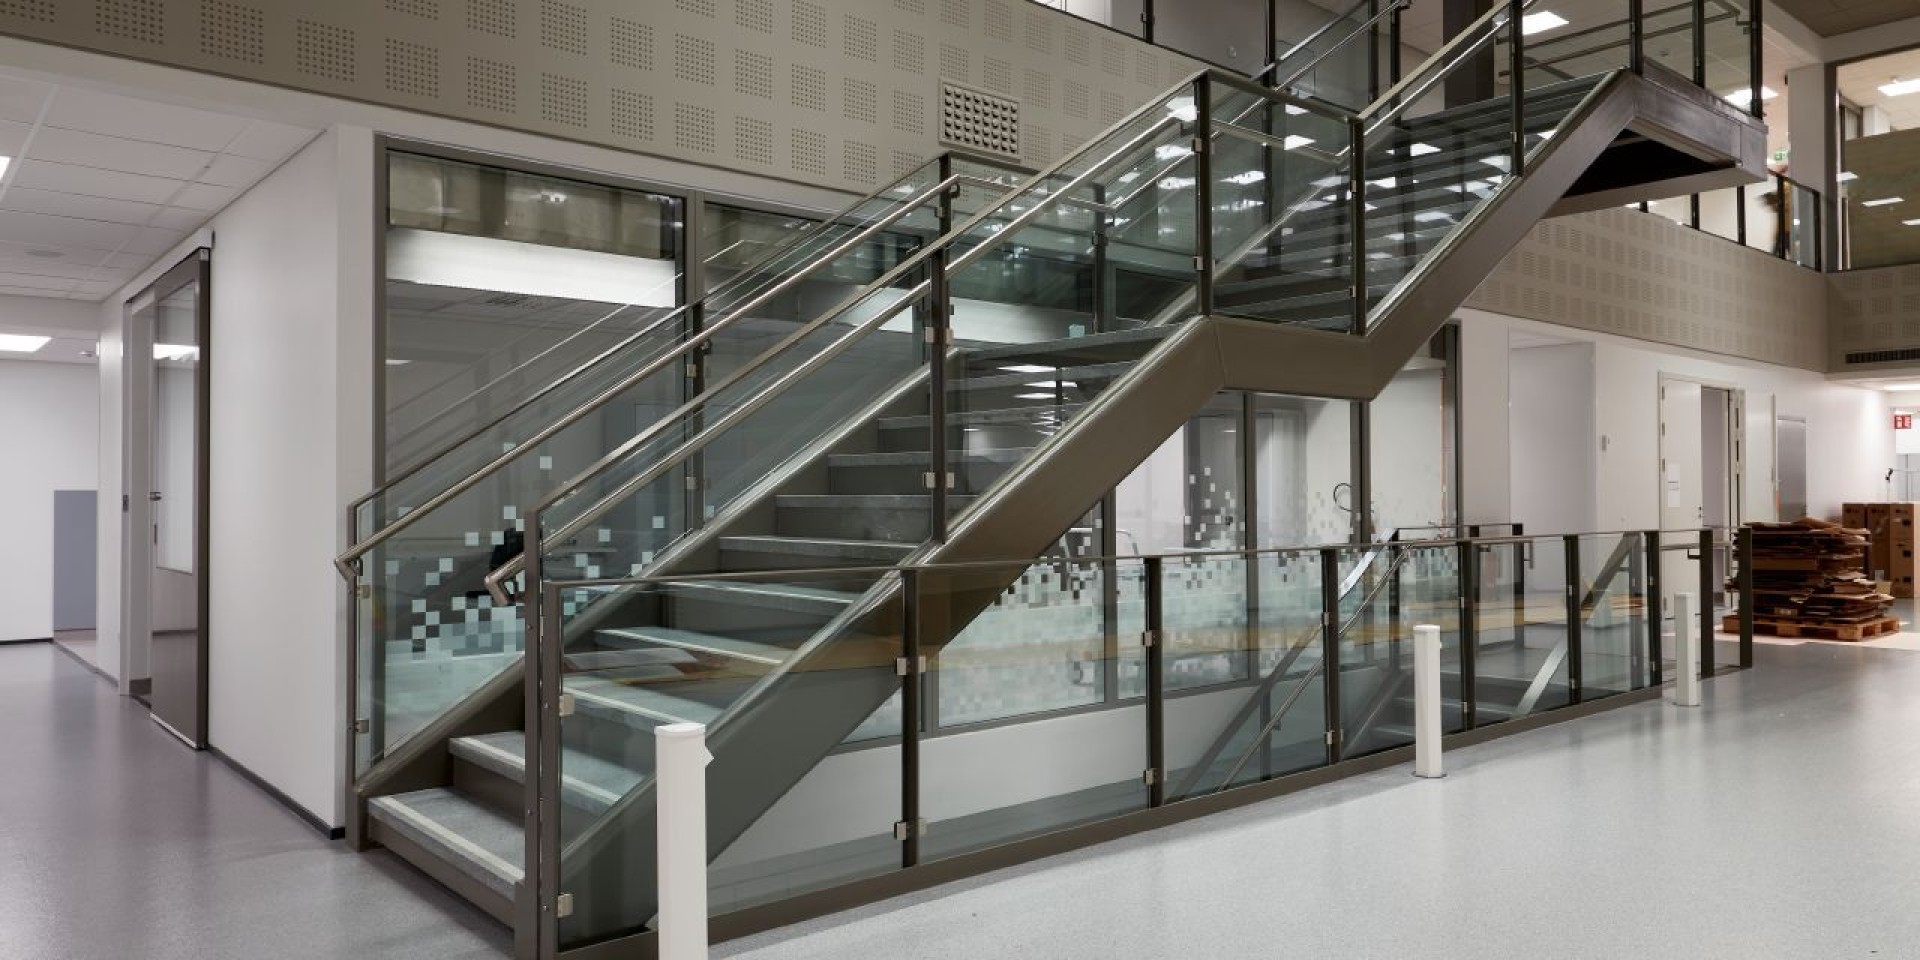 Coating solutions for floors in public and commercial buildings